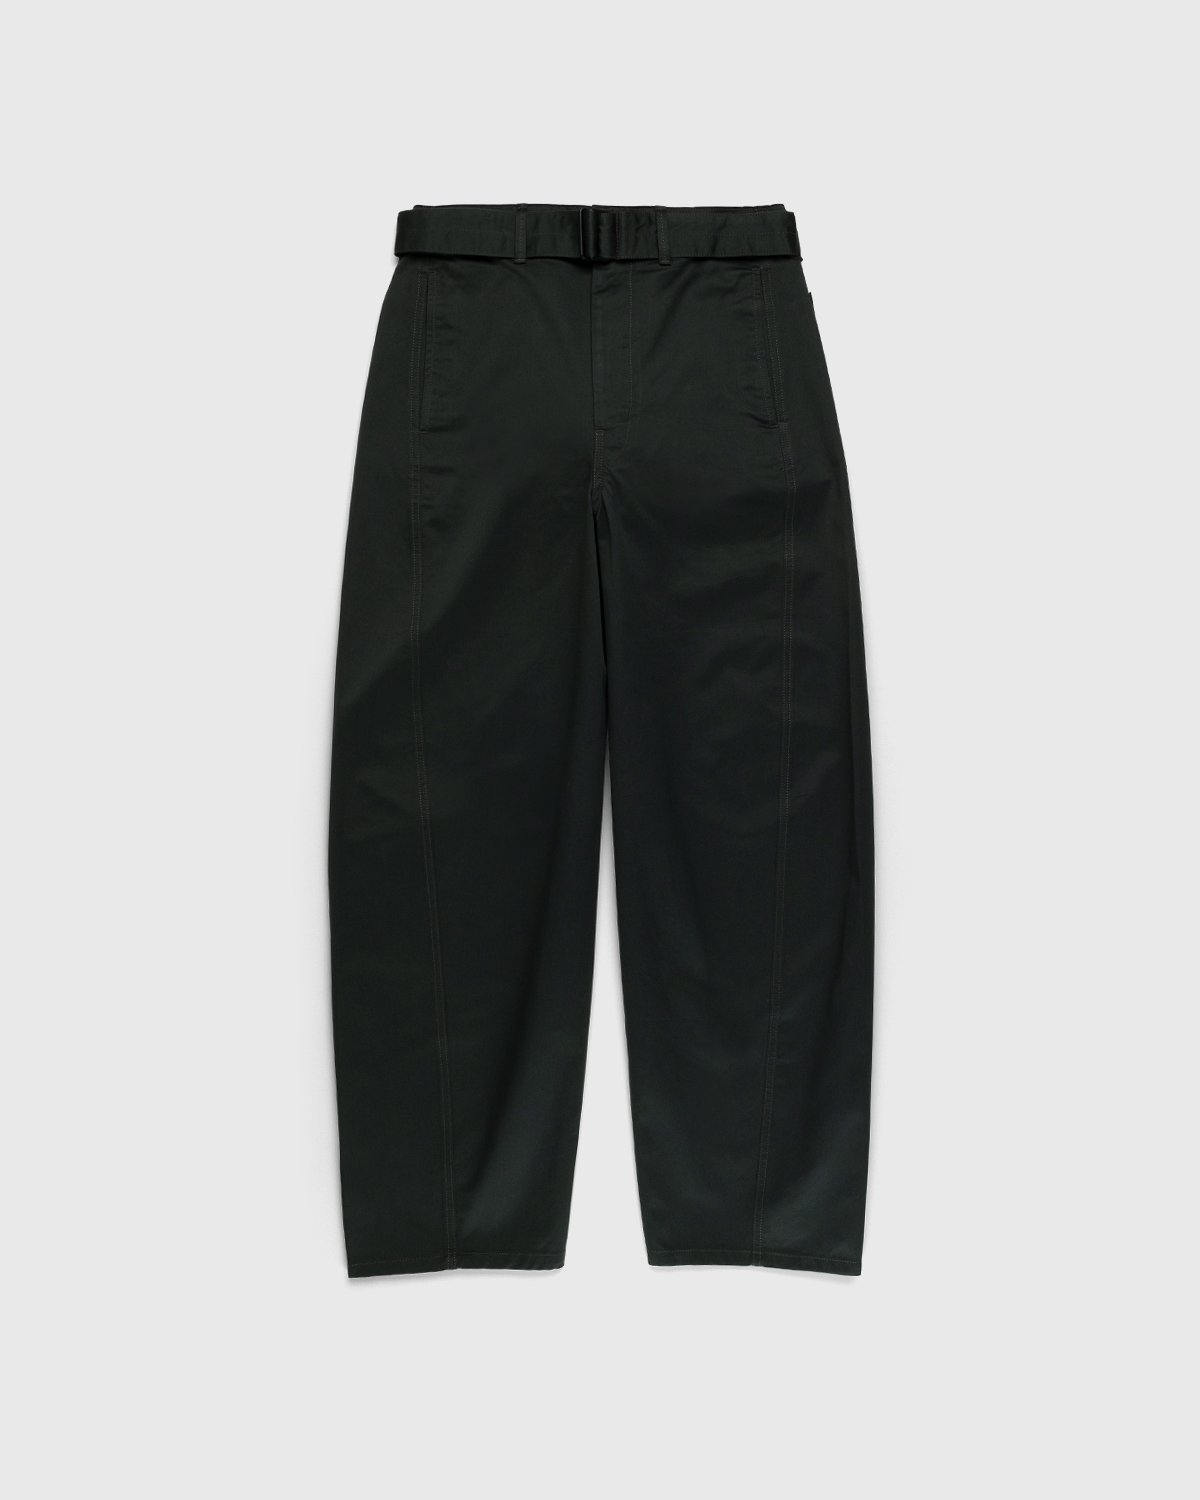 Lemaire - Twisted Belted Pants Dark Slate Green - Clothing - Grey - Image 1